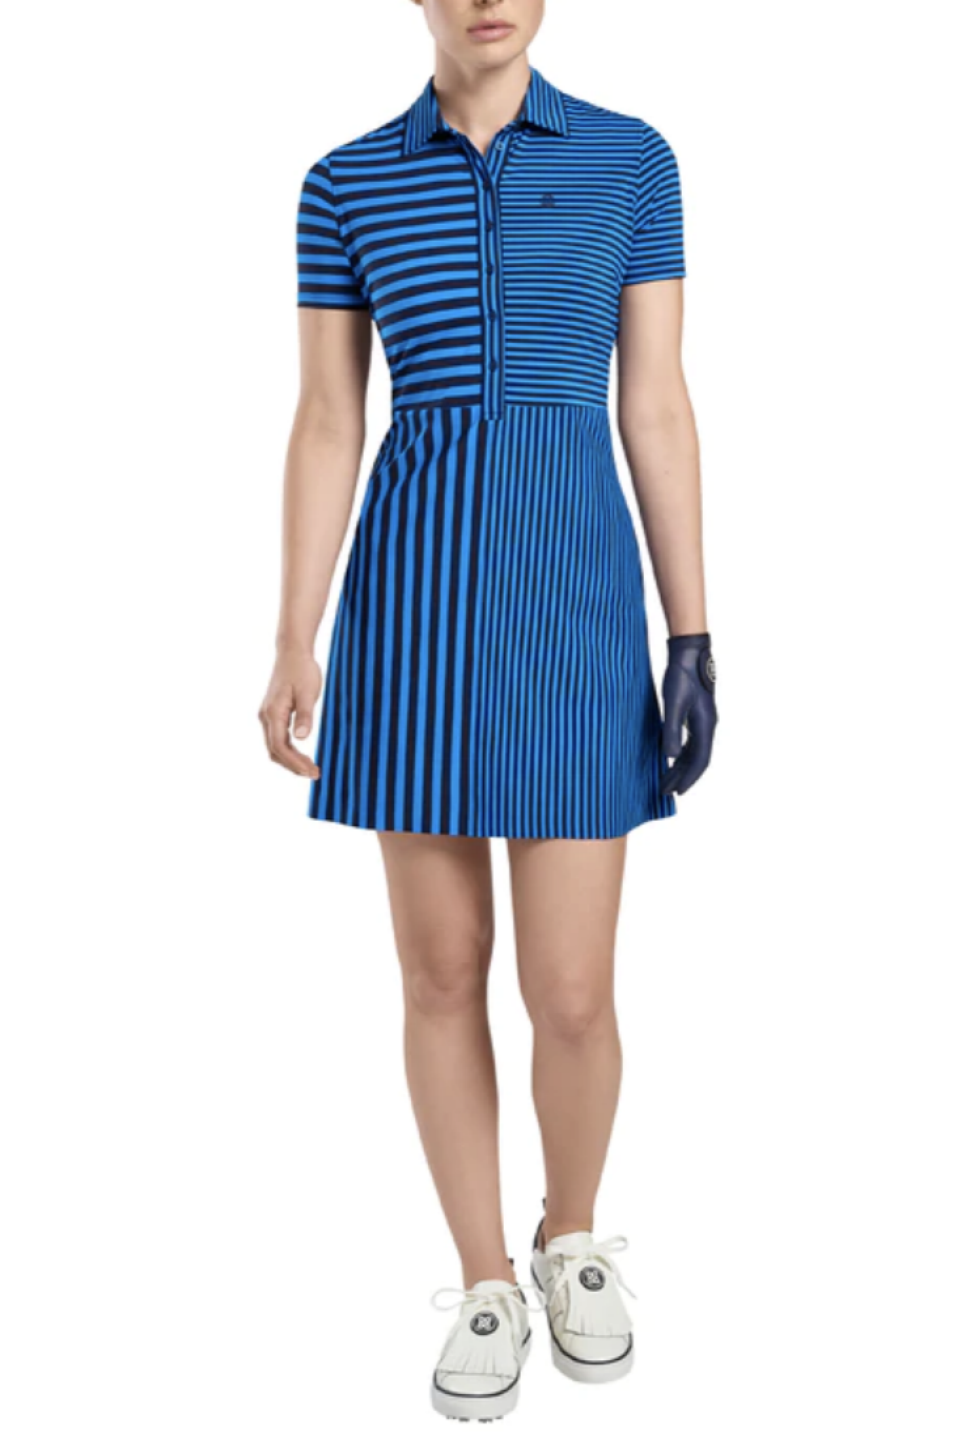 G/Fore Mixed Stripe Dress